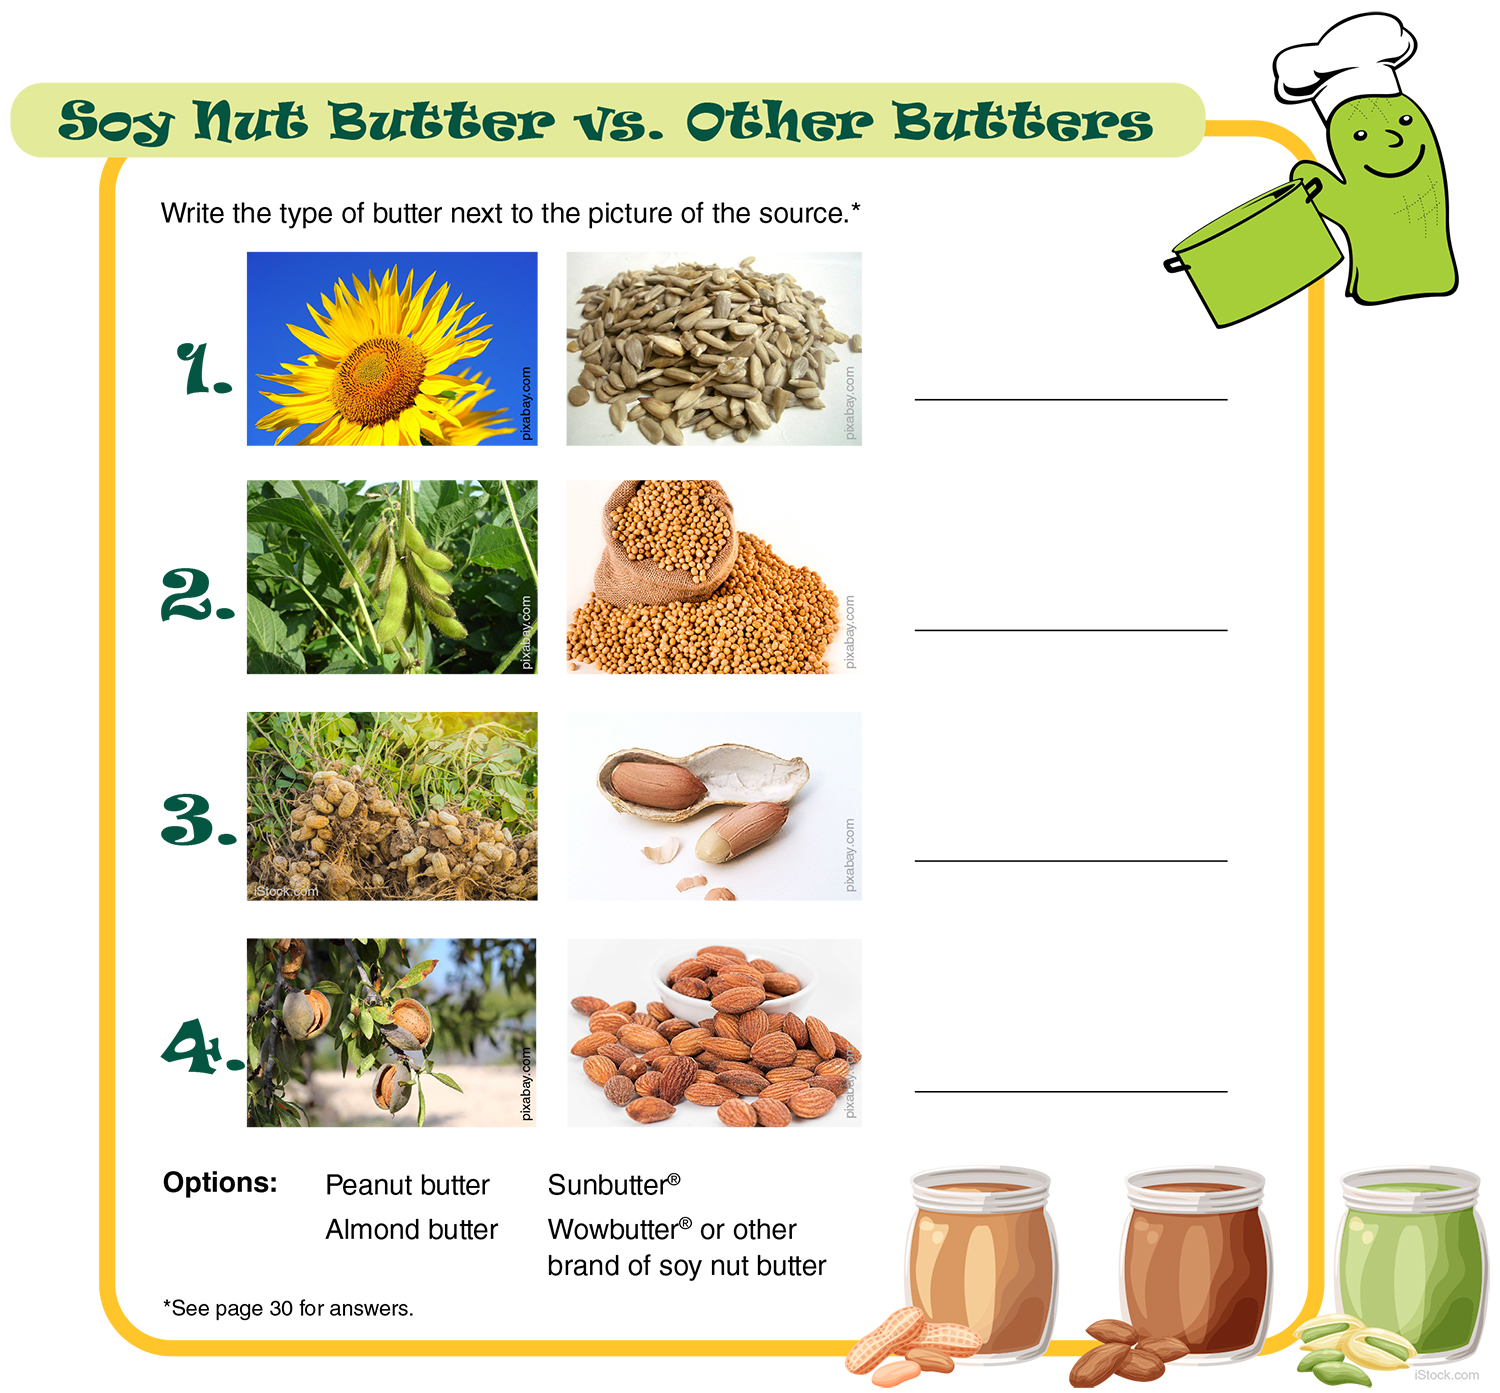 Soy Nut Butter vs. Other Butters